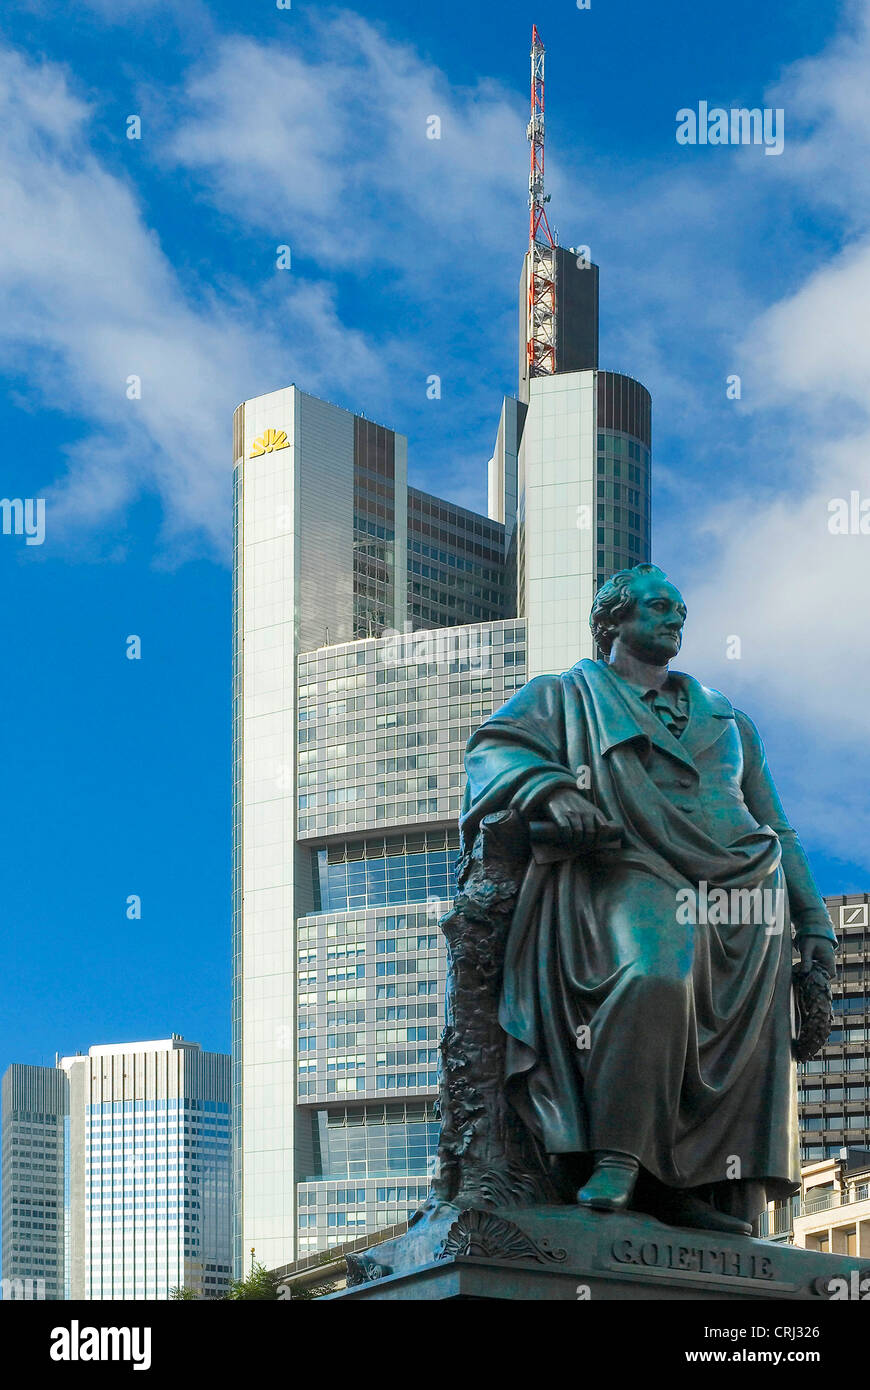 Commer Bank with Goethe memorial in foreground, Germany, Hesse, Frankfurt am Main Stock Photo